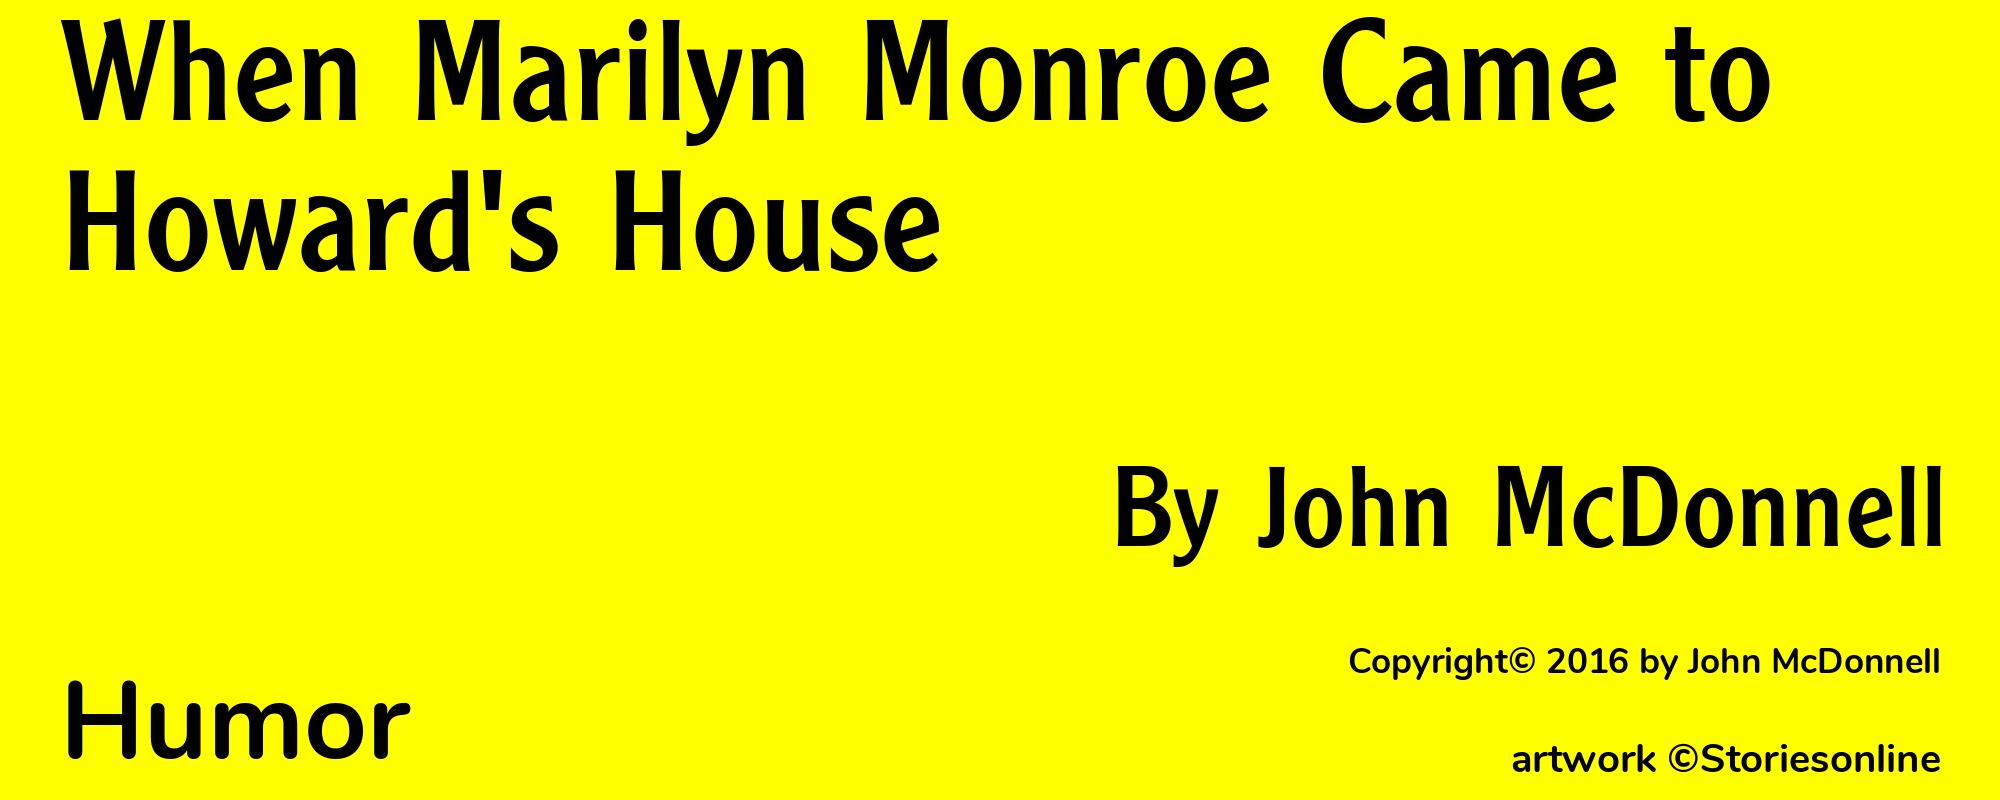 When Marilyn Monroe Came to Howard's House - Cover